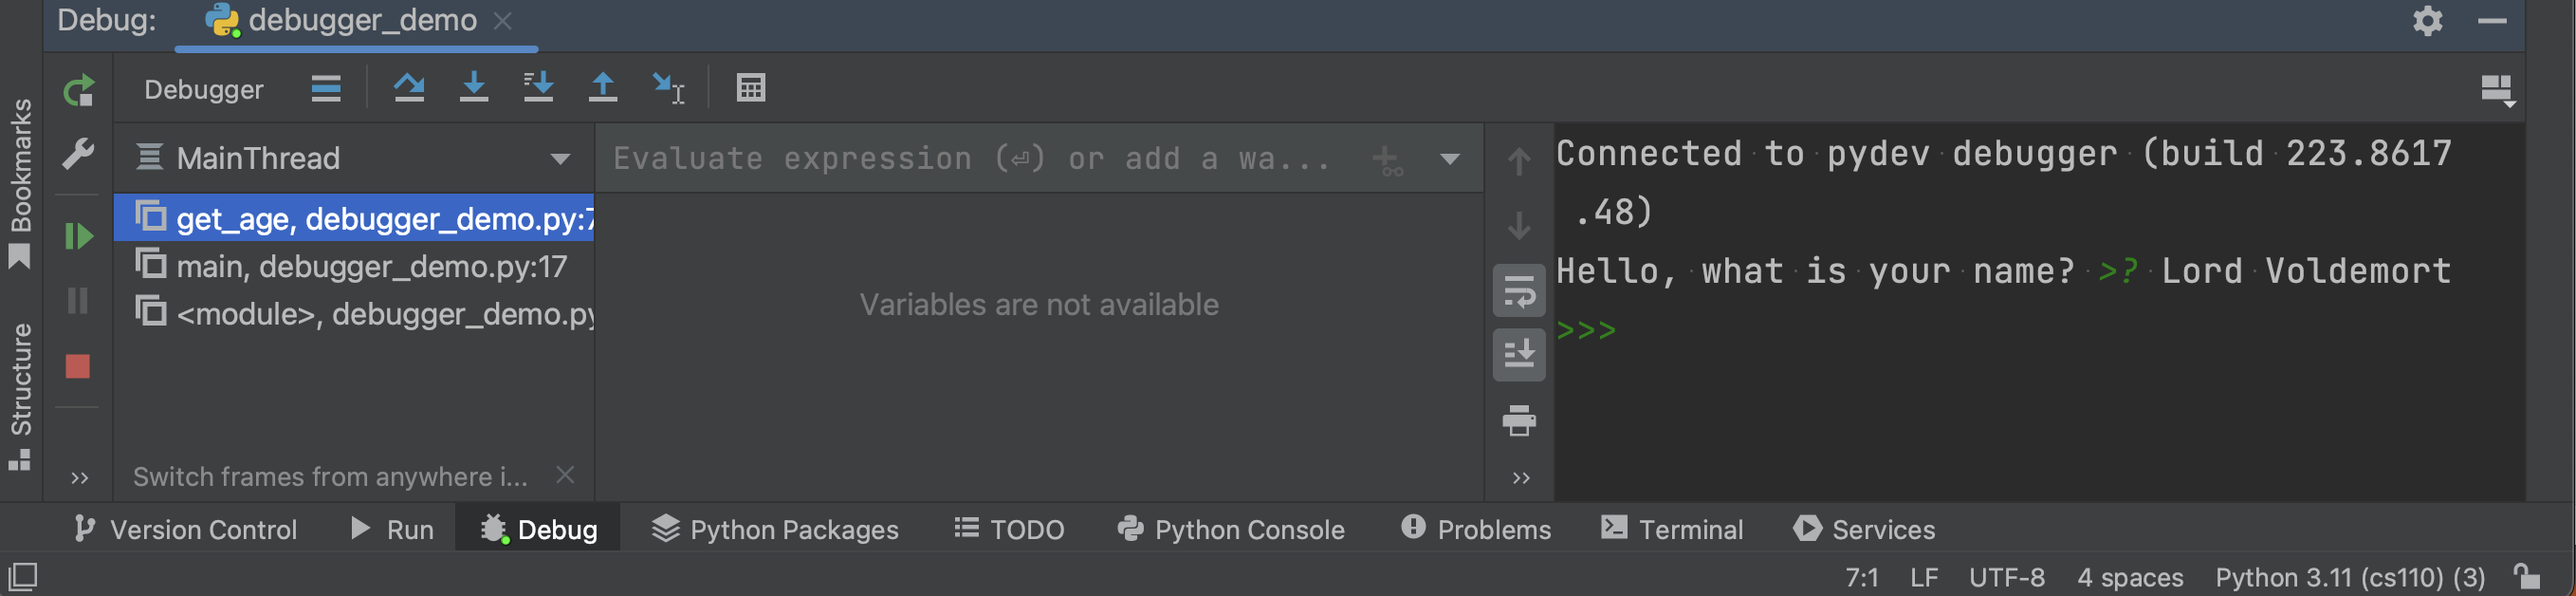 Pycharm debugger and console windows side-by-side